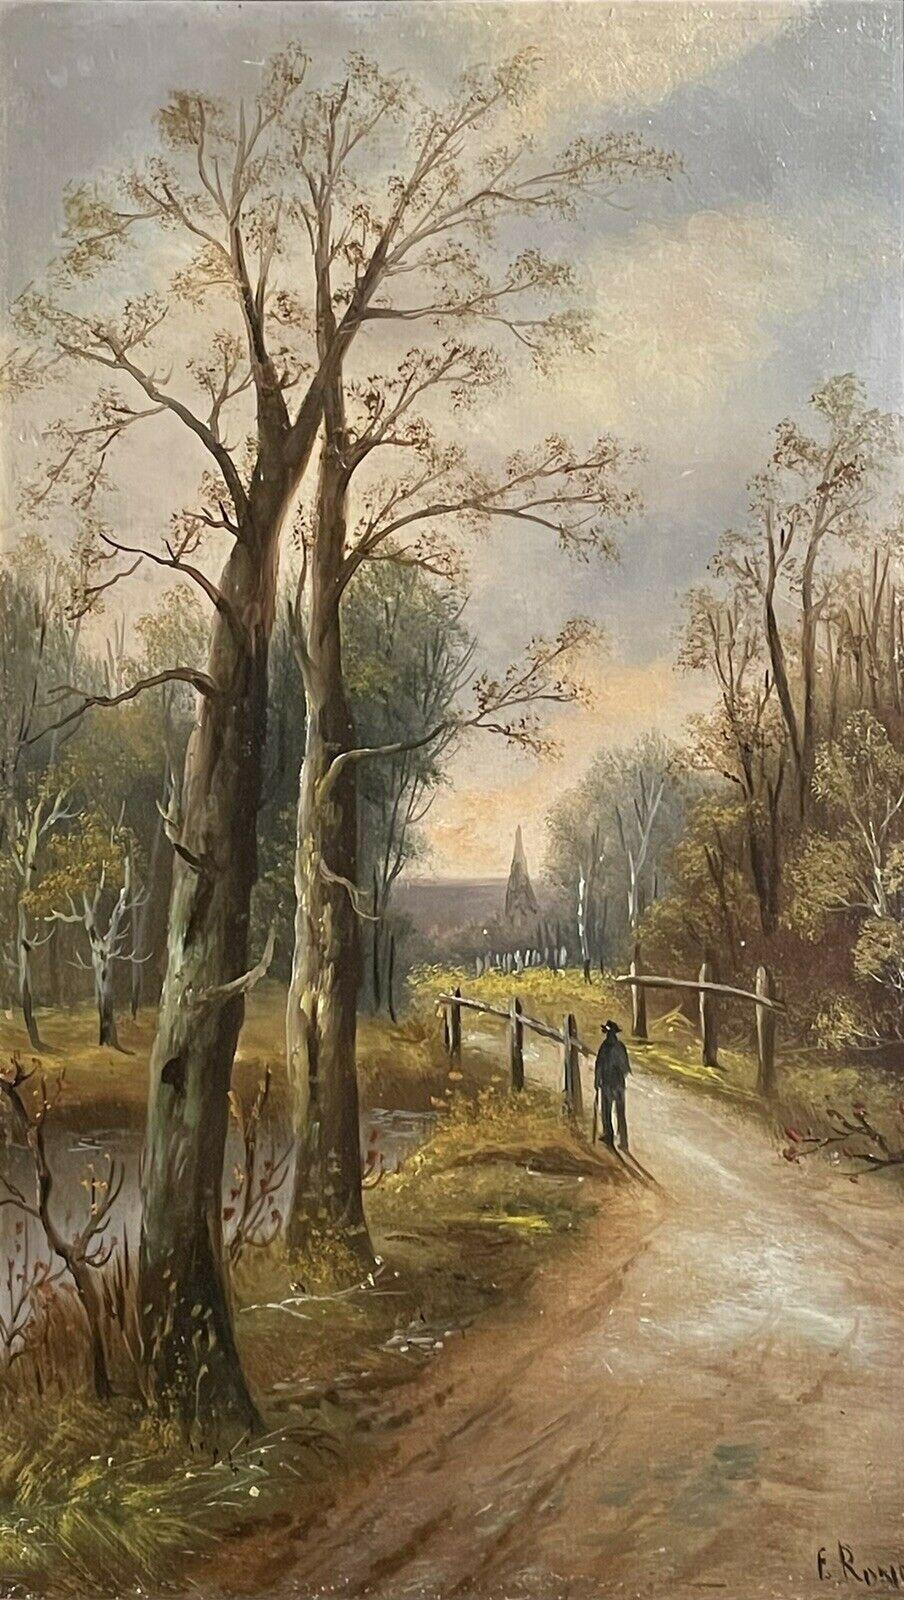 SIGNED VICTORIAN OIL PAINTING - FIGURE WALKING ALONG COUNTRY RURAL LANE - FRAMED - Brown Landscape Painting by Unknown